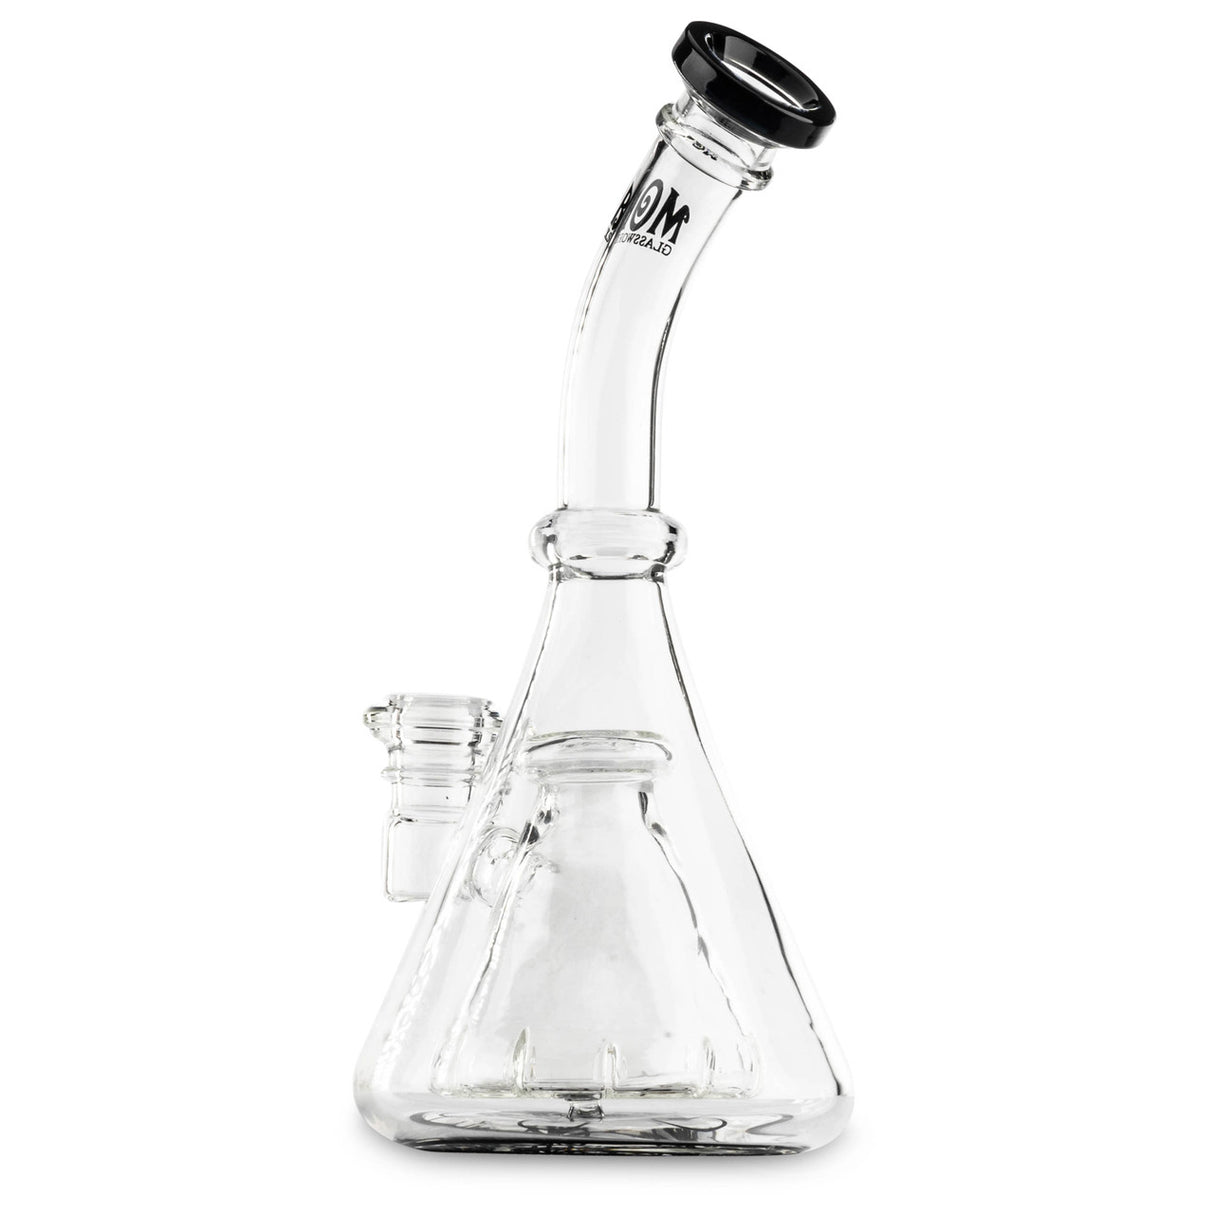 MOB Glass Black Collins Percolator Bubbler used for smoking dry herbs